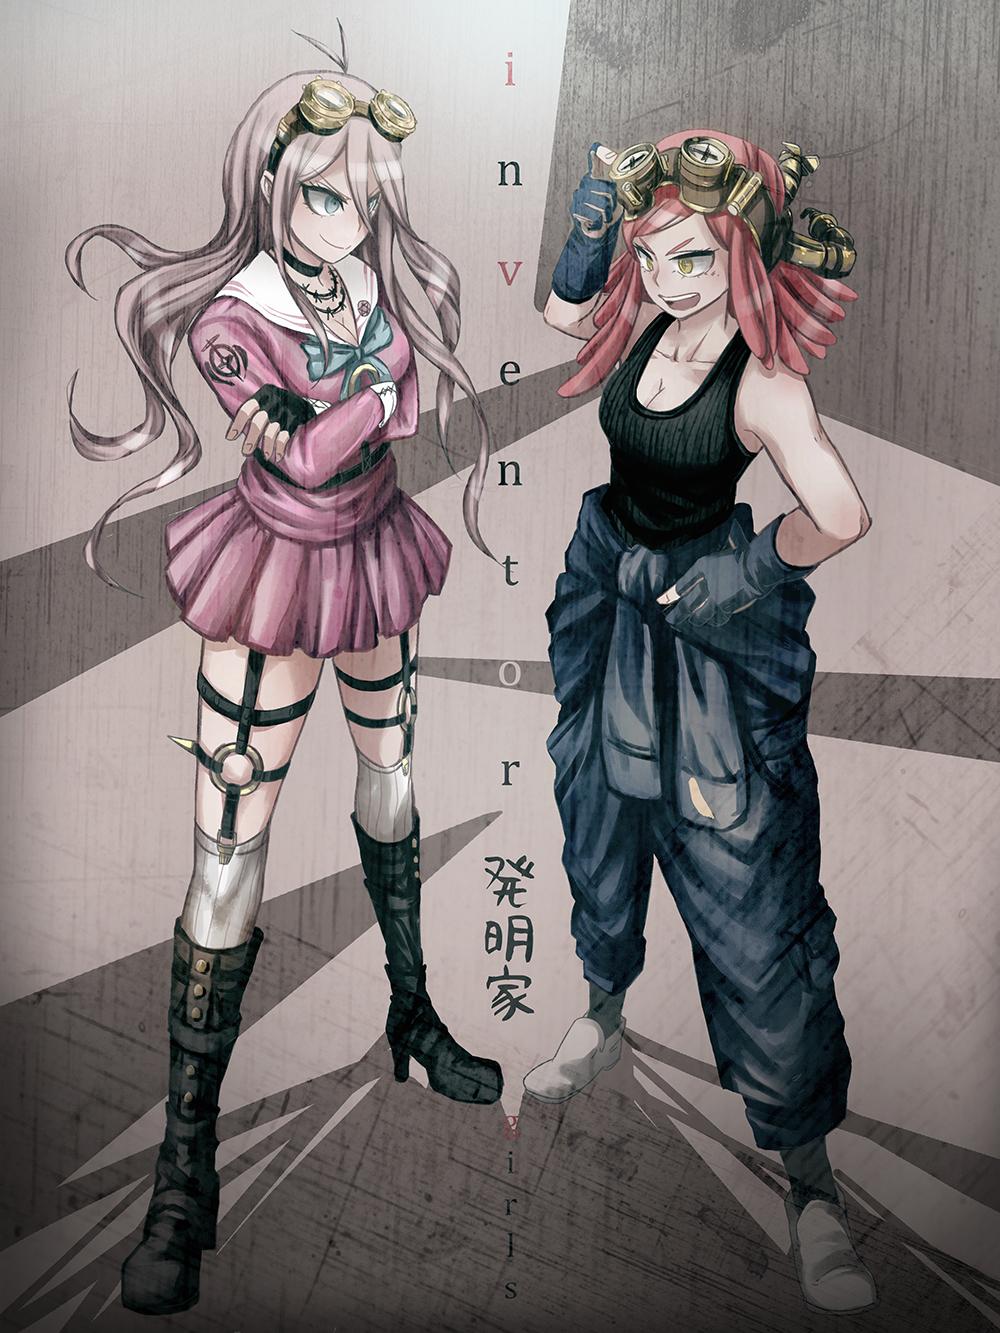 Mei Hatsume meets her match